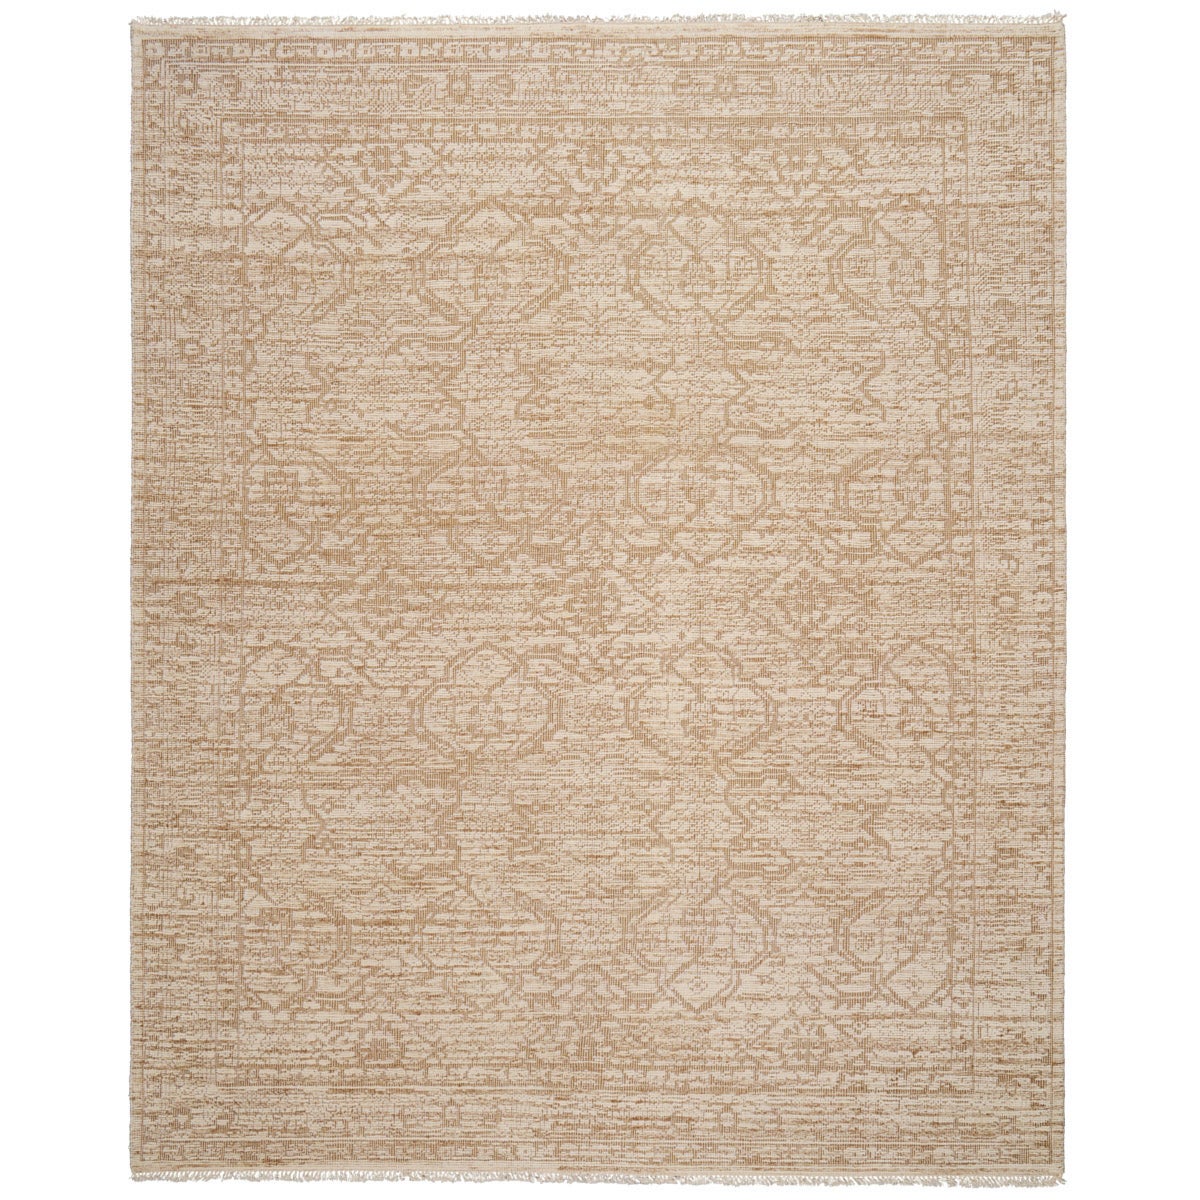 Ankara Hand-Knotted Wool Rug in Sand, 9x12' For Sale